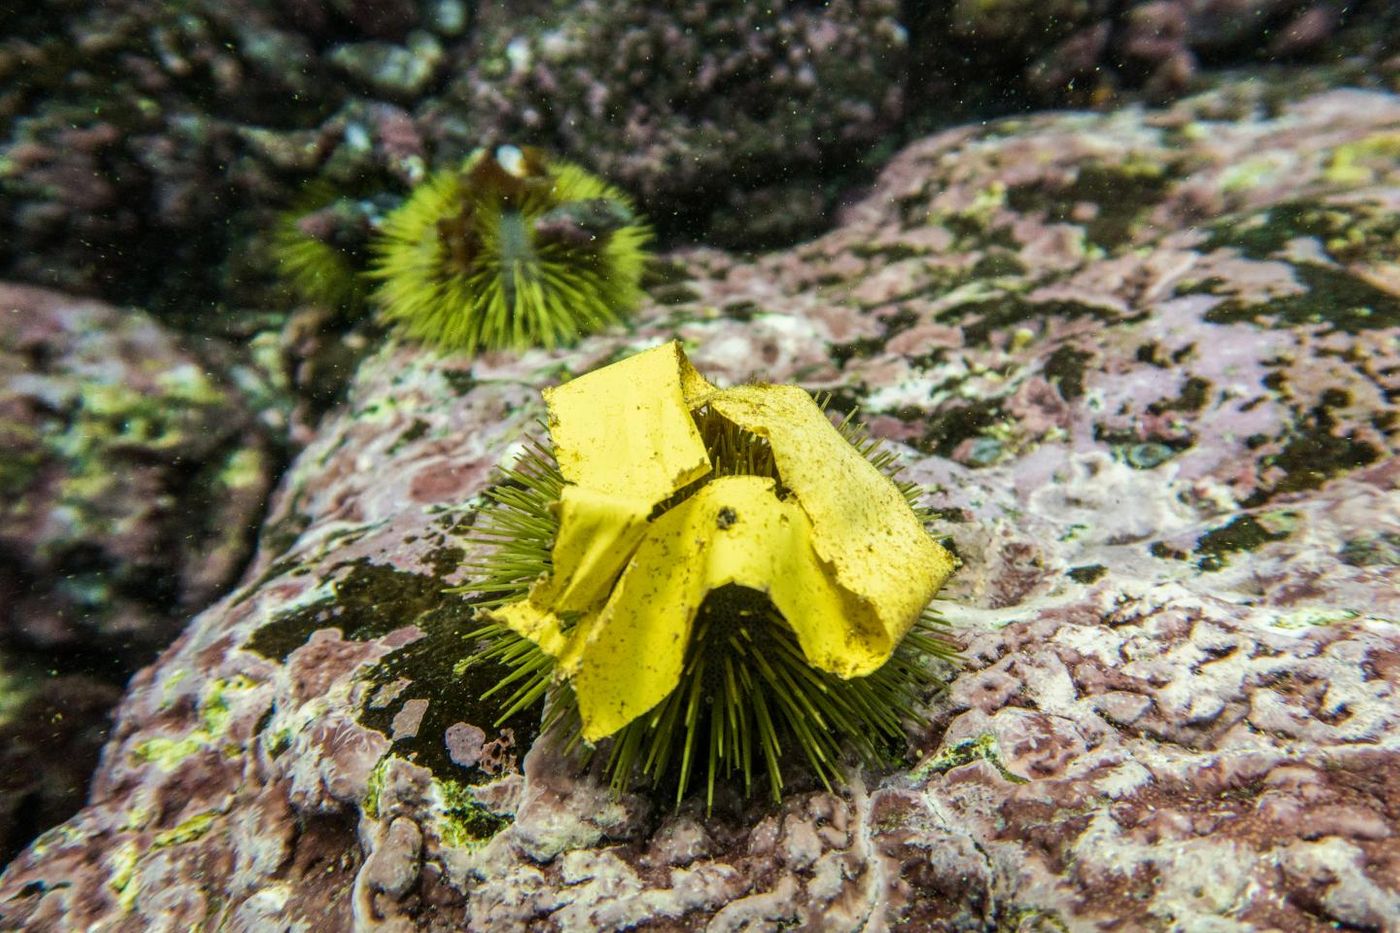 A piece of plastic tape found lying on an urchin. / Credit: Adam Porter